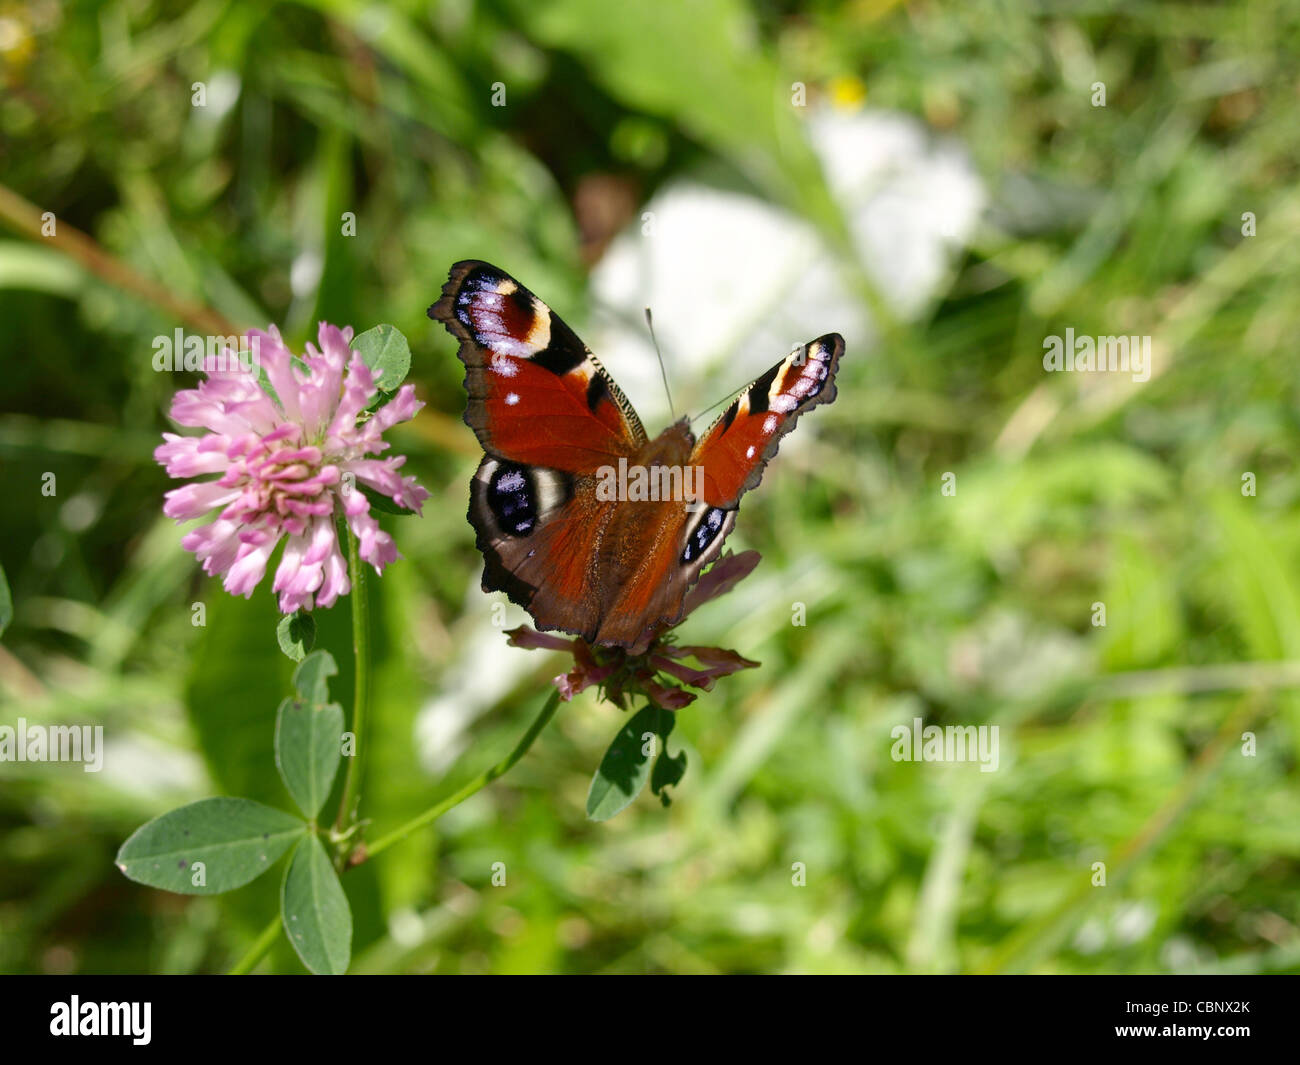 European Peacocl butterfly / Inachis io / Tagpfauenauge Stock Photo